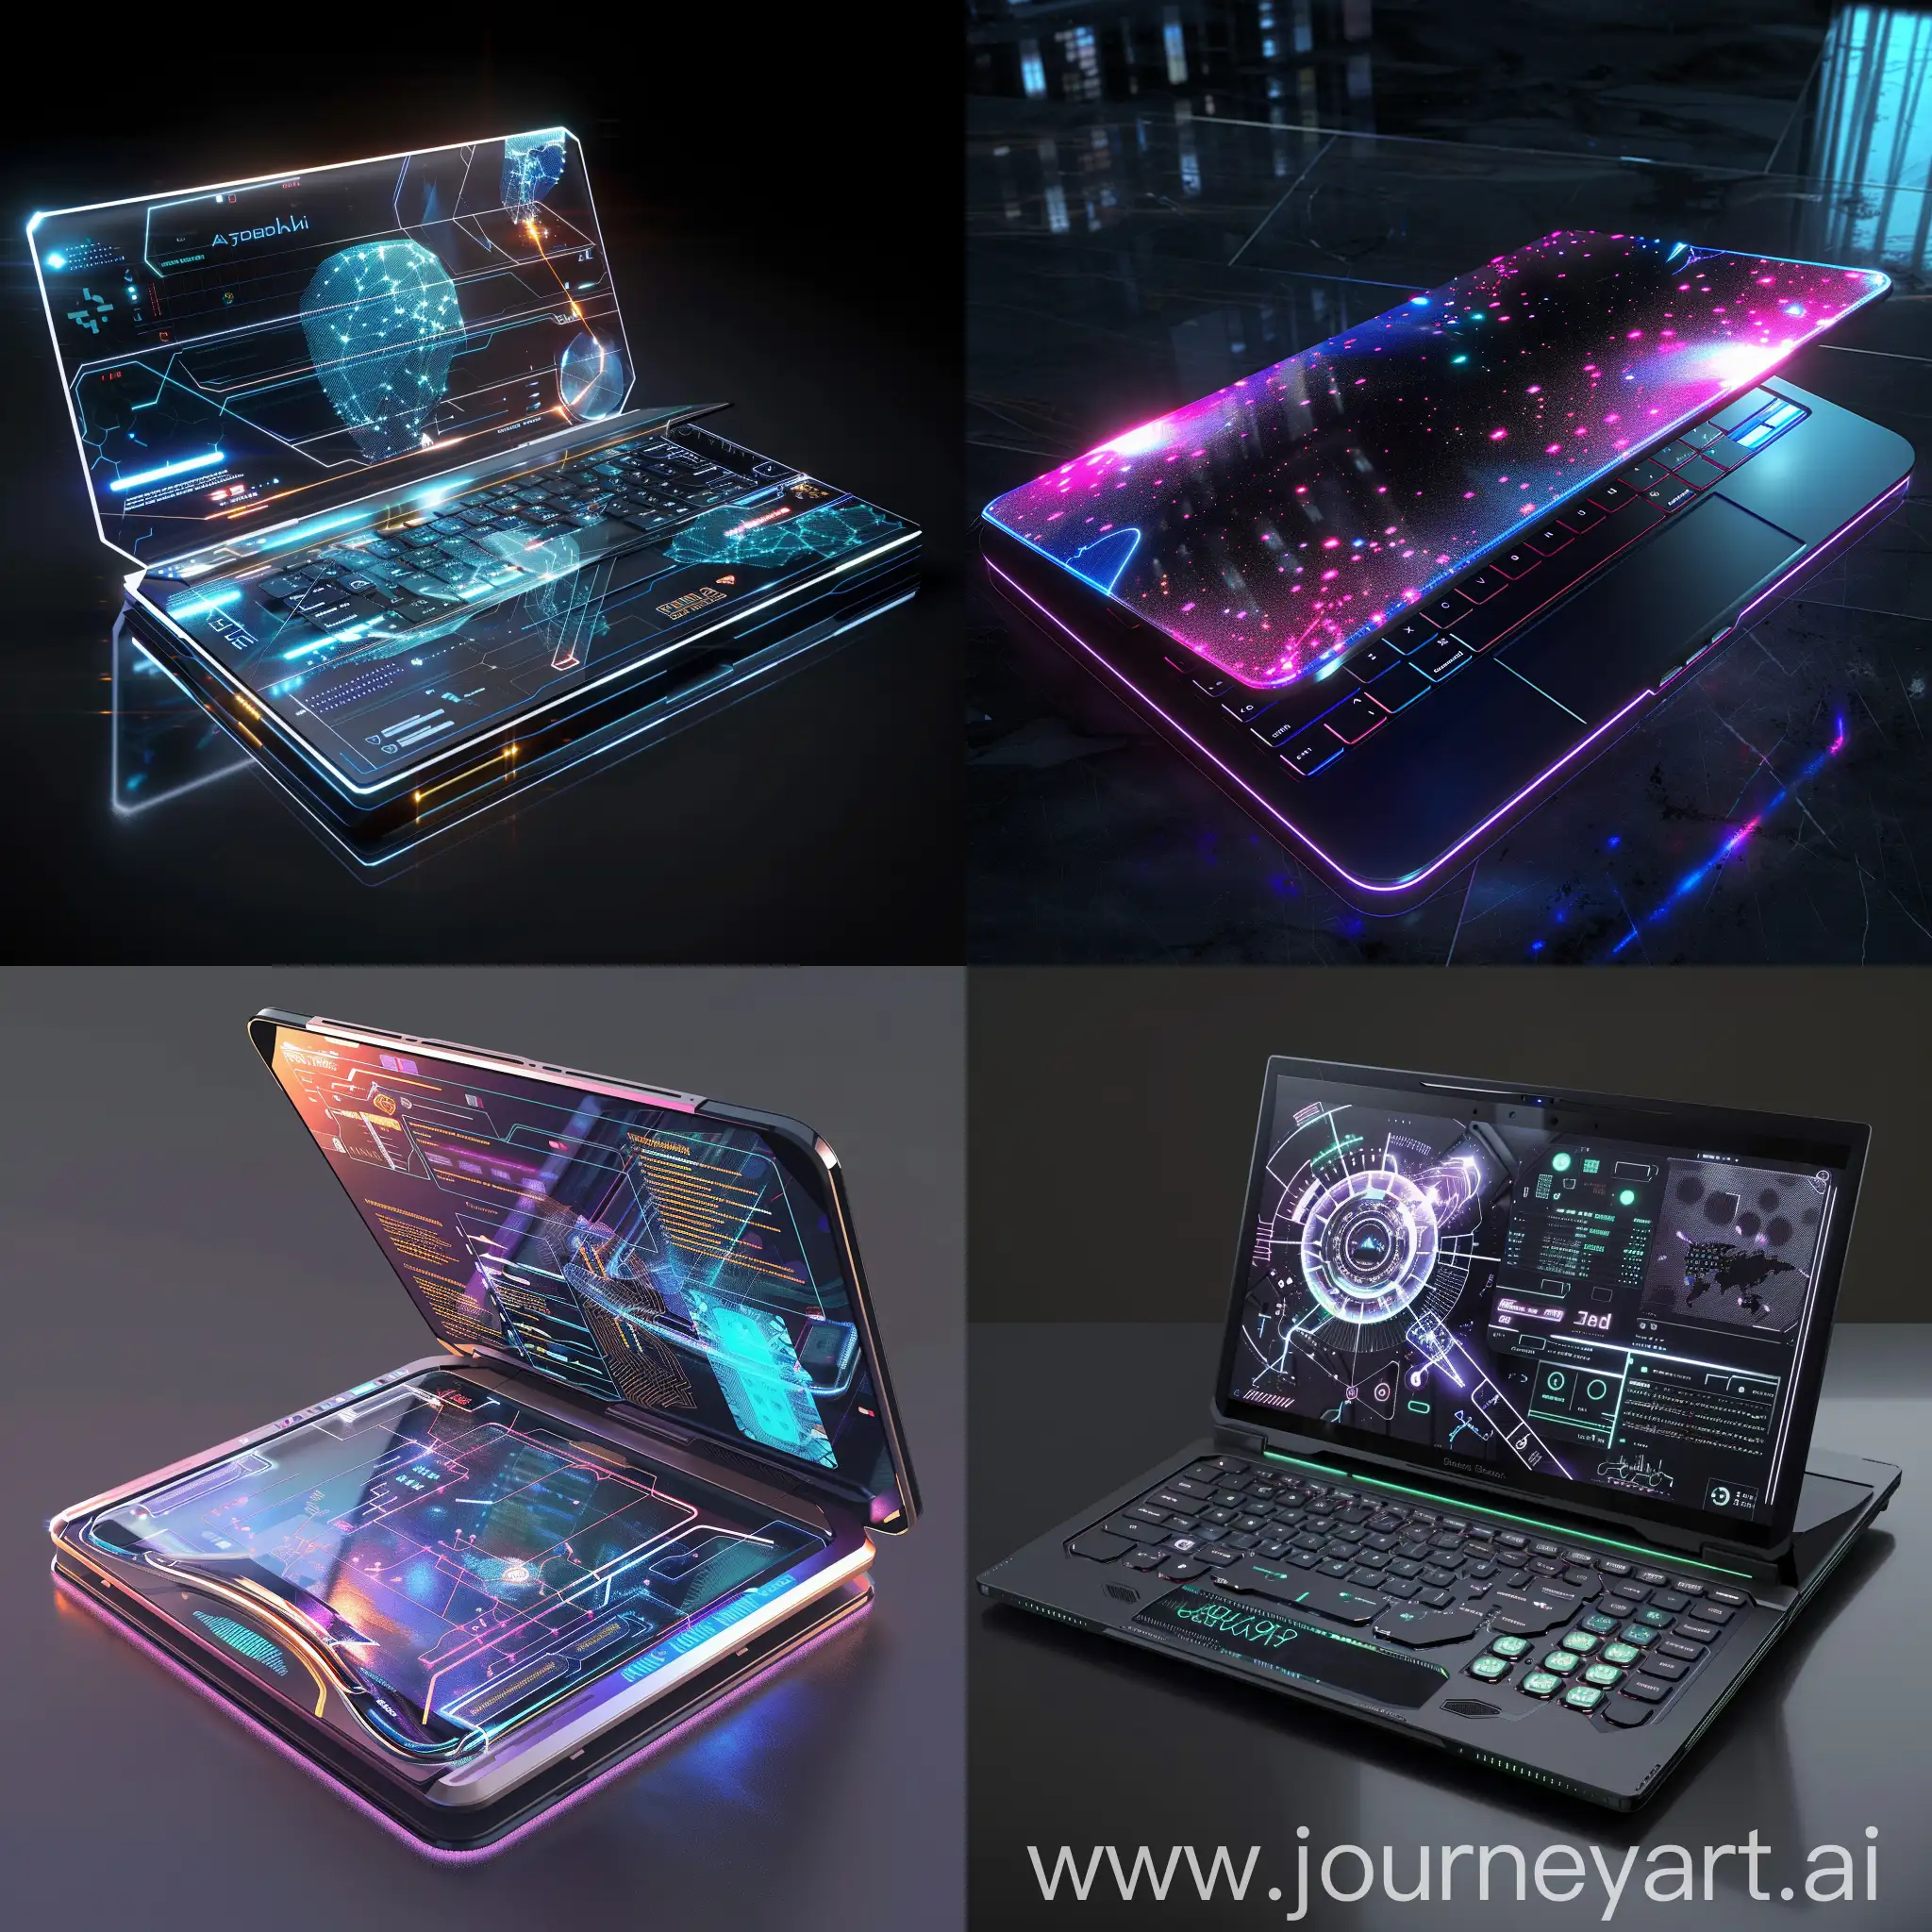 Futuristic-Laptop-with-Quantum-Processing-Units-and-Holographic-Displays